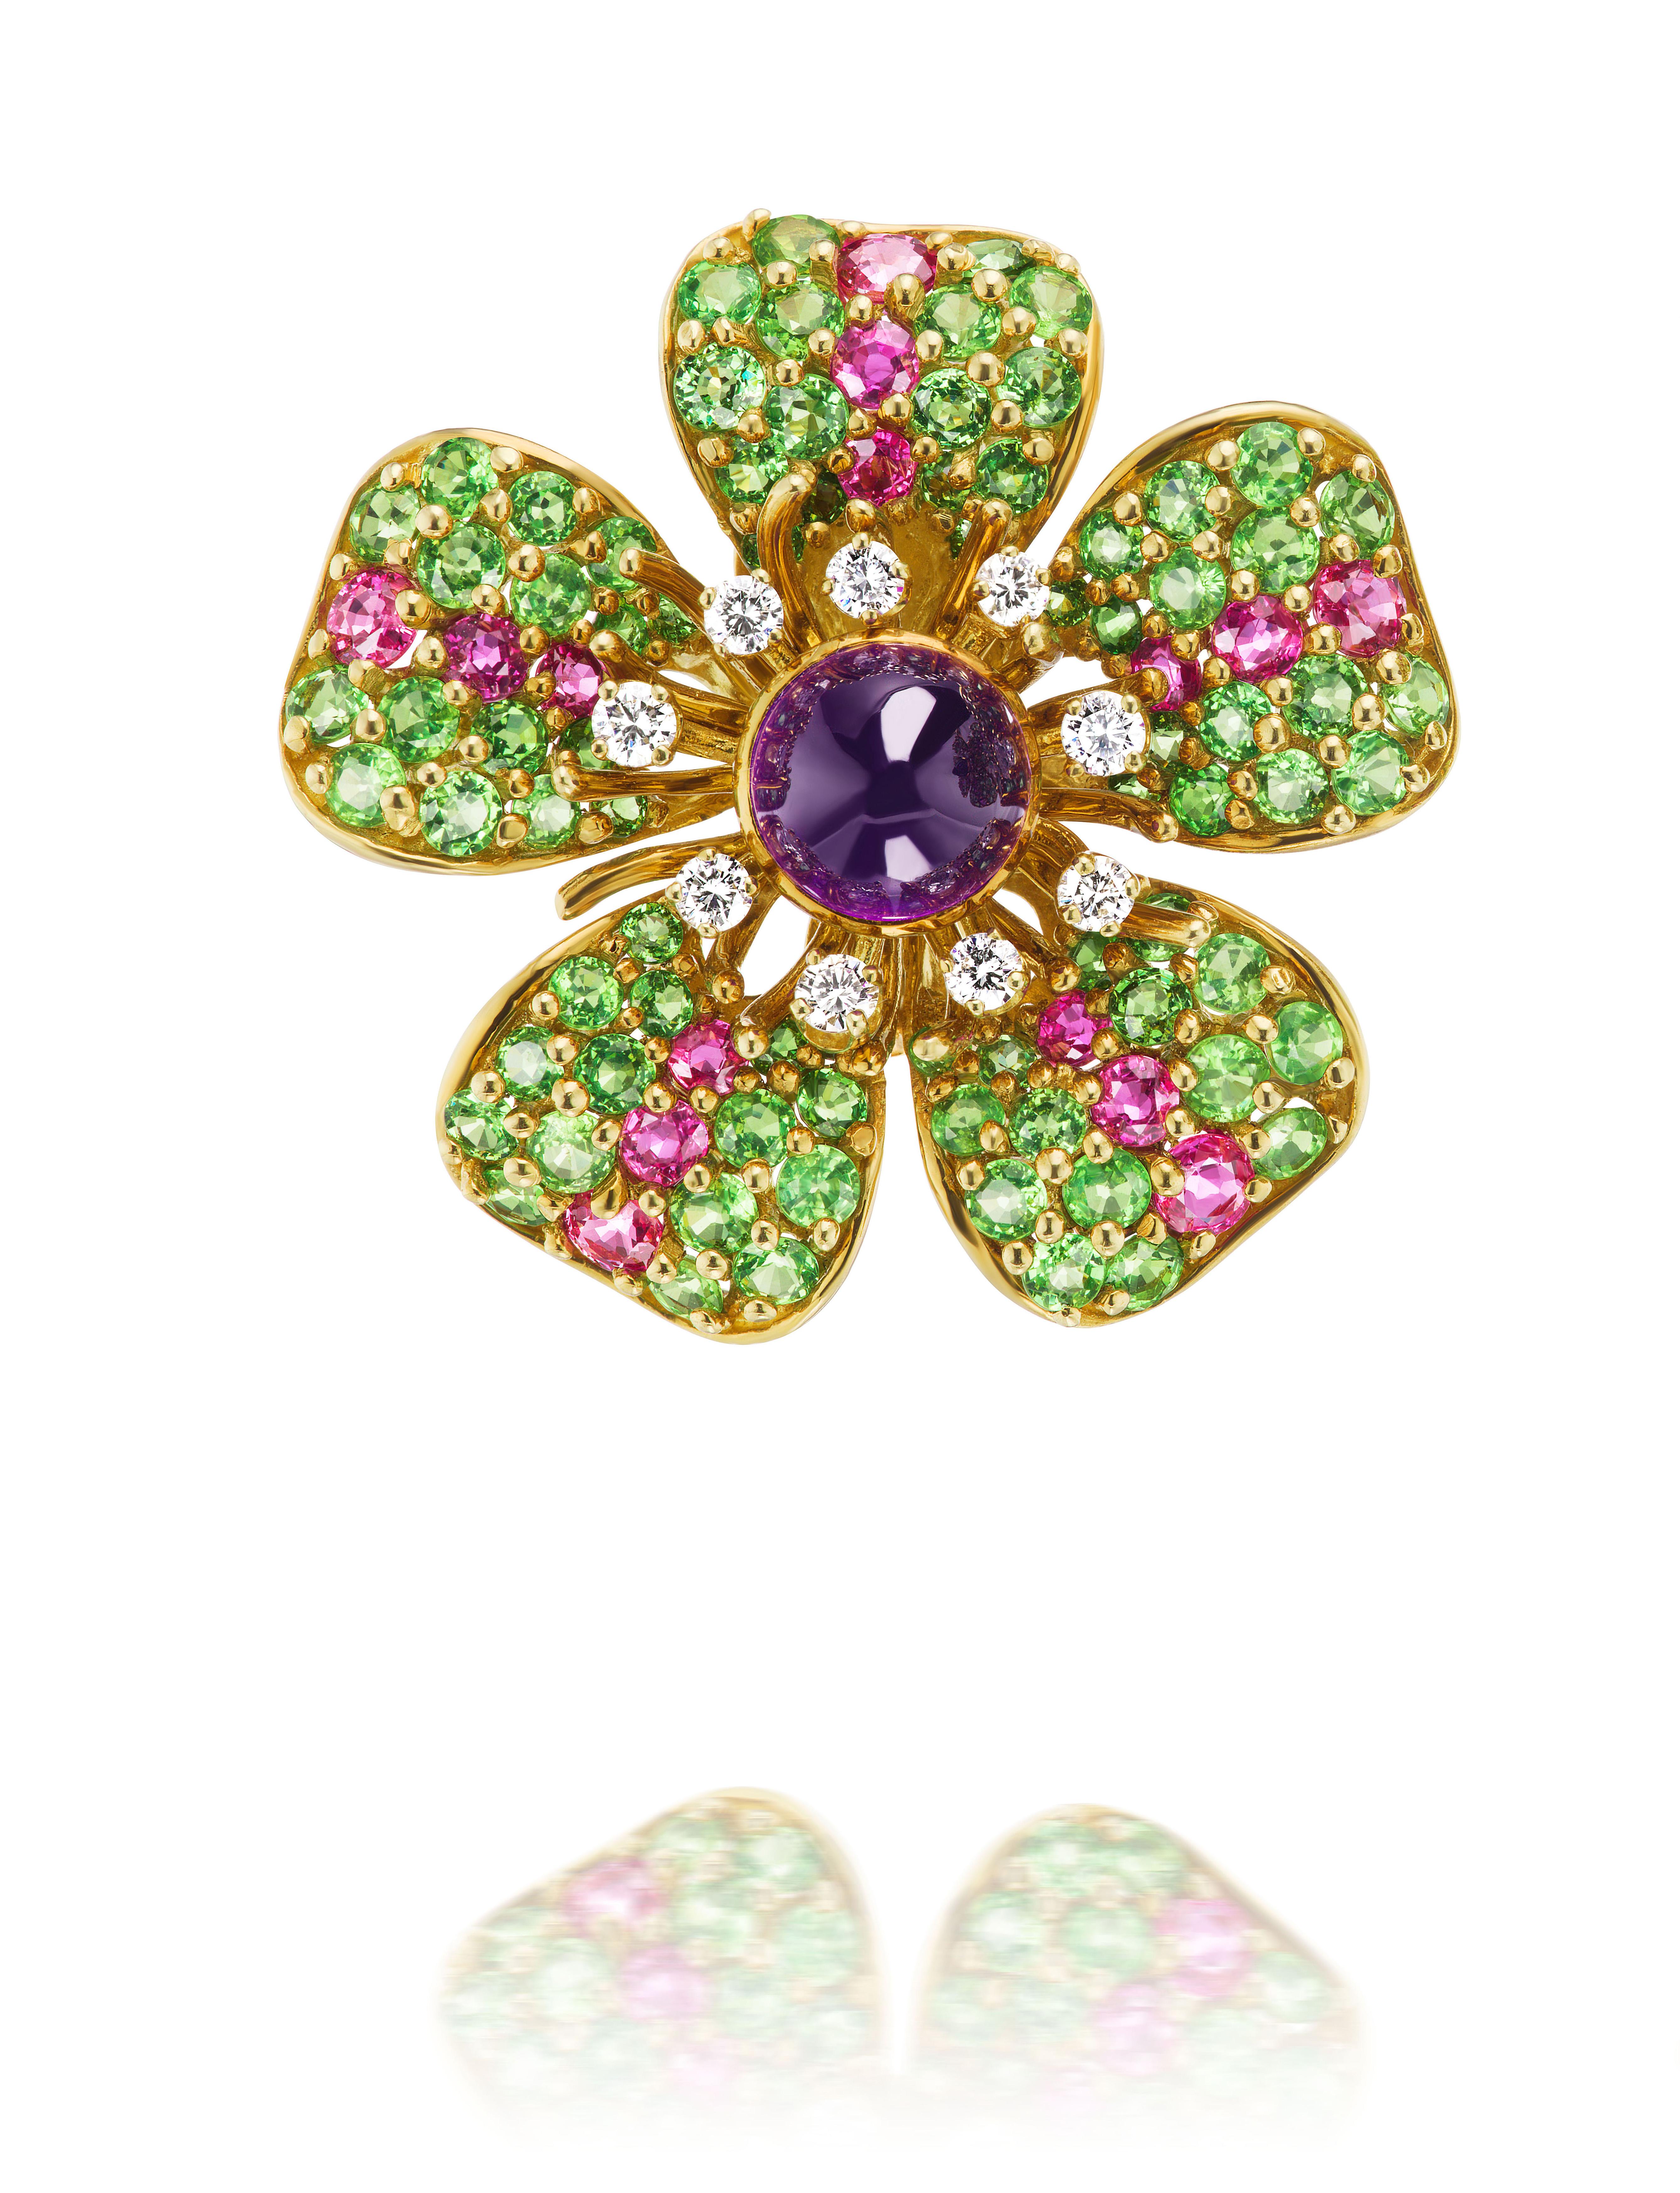 Wonderful crafted design by TIFFANY & CO circa 1993 consisting of impressive cabochon amethyst centers of approximately 5.20 carats accentuated by diamond stamen, and tsavorite and rhodolite petals in 18K gold. 

Stamped TIFFANY & CO 1993